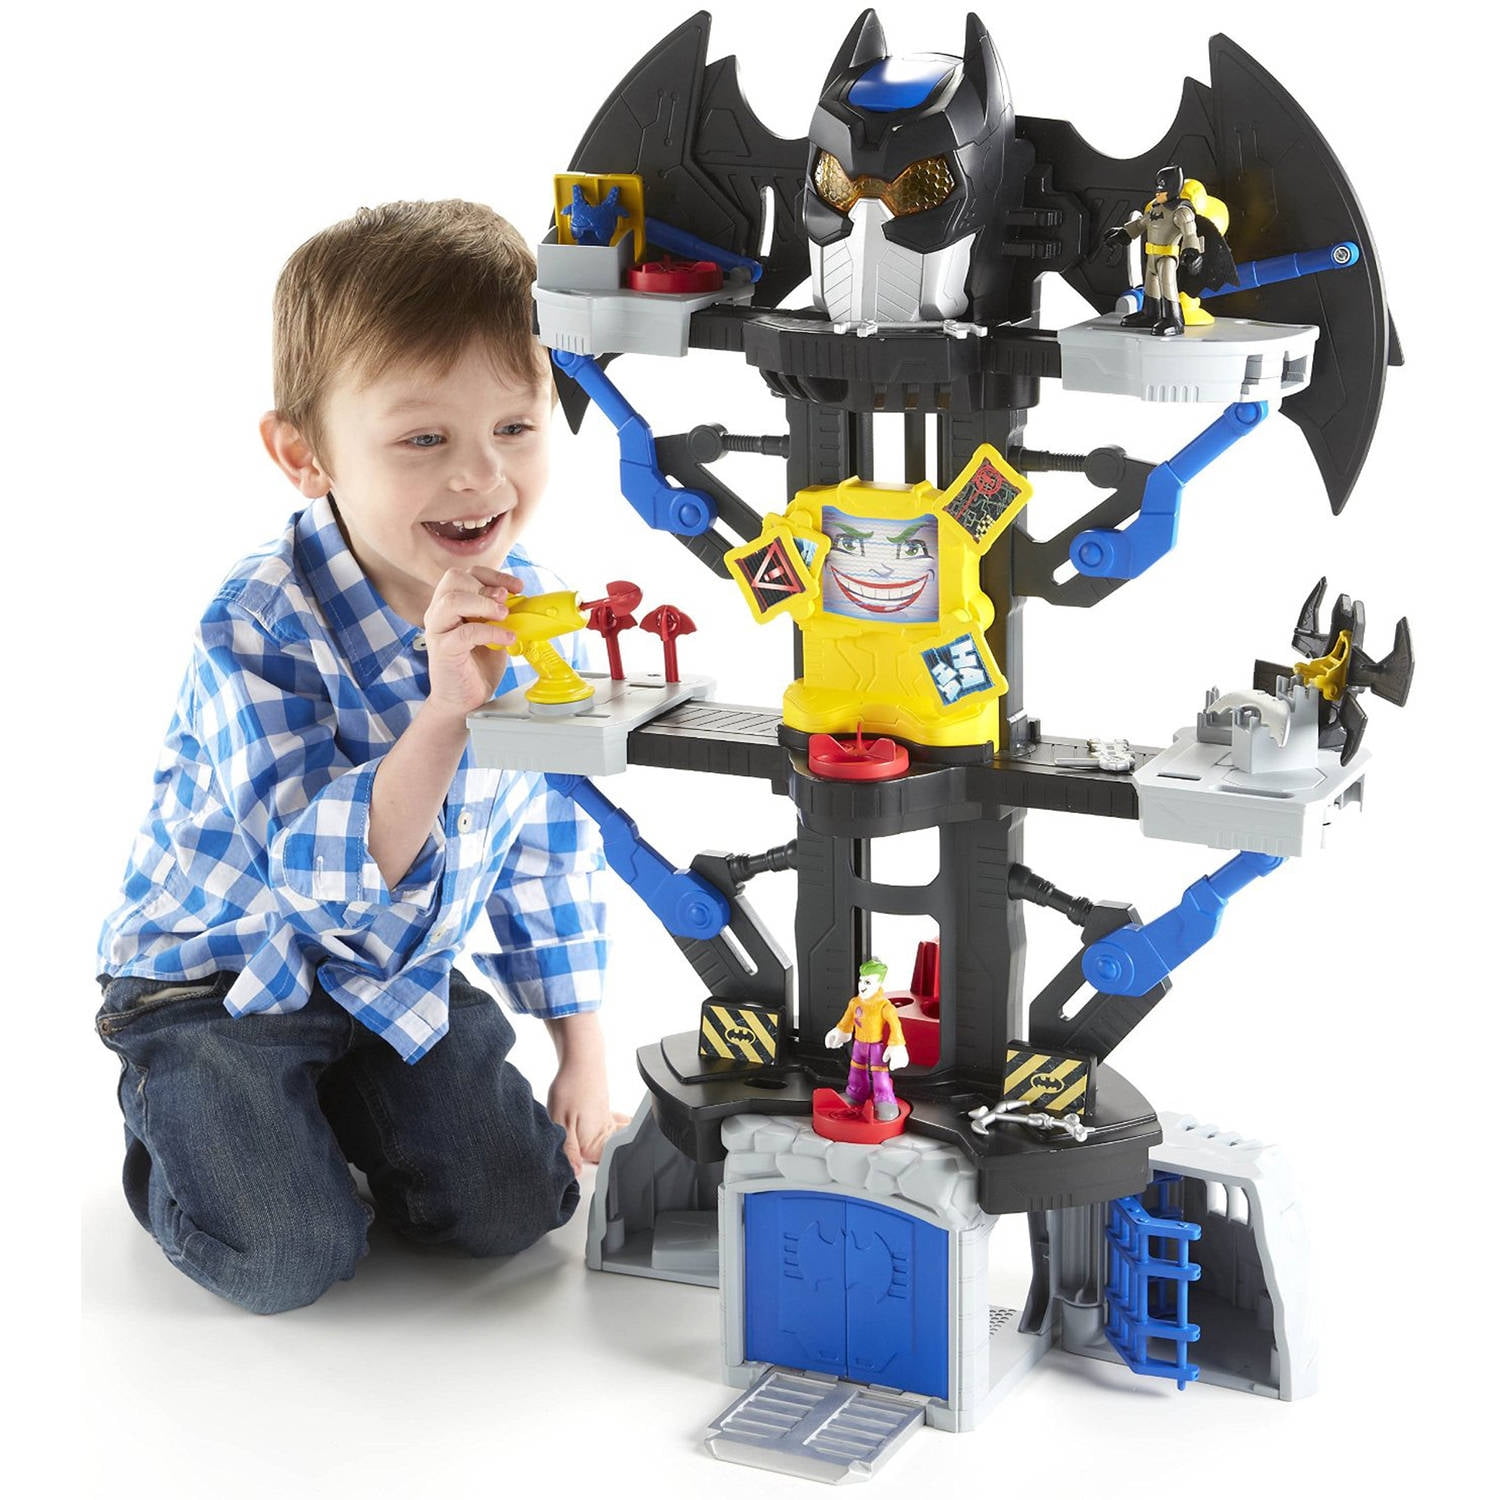 Details about   Fisher Price Imaginext Gotham City Jail Action Playset DC Super Friends LOOSE 